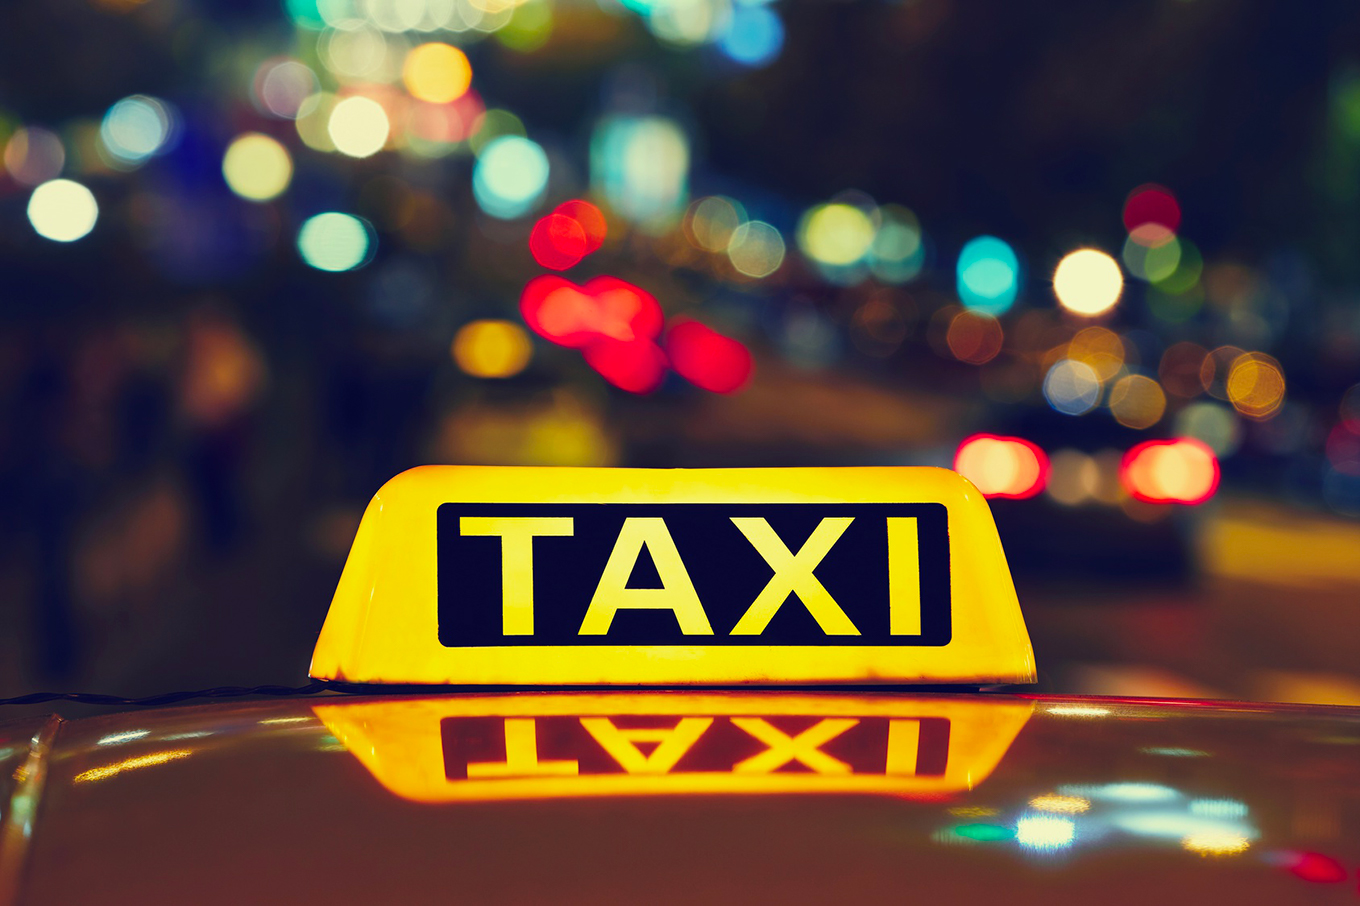 Image taxi